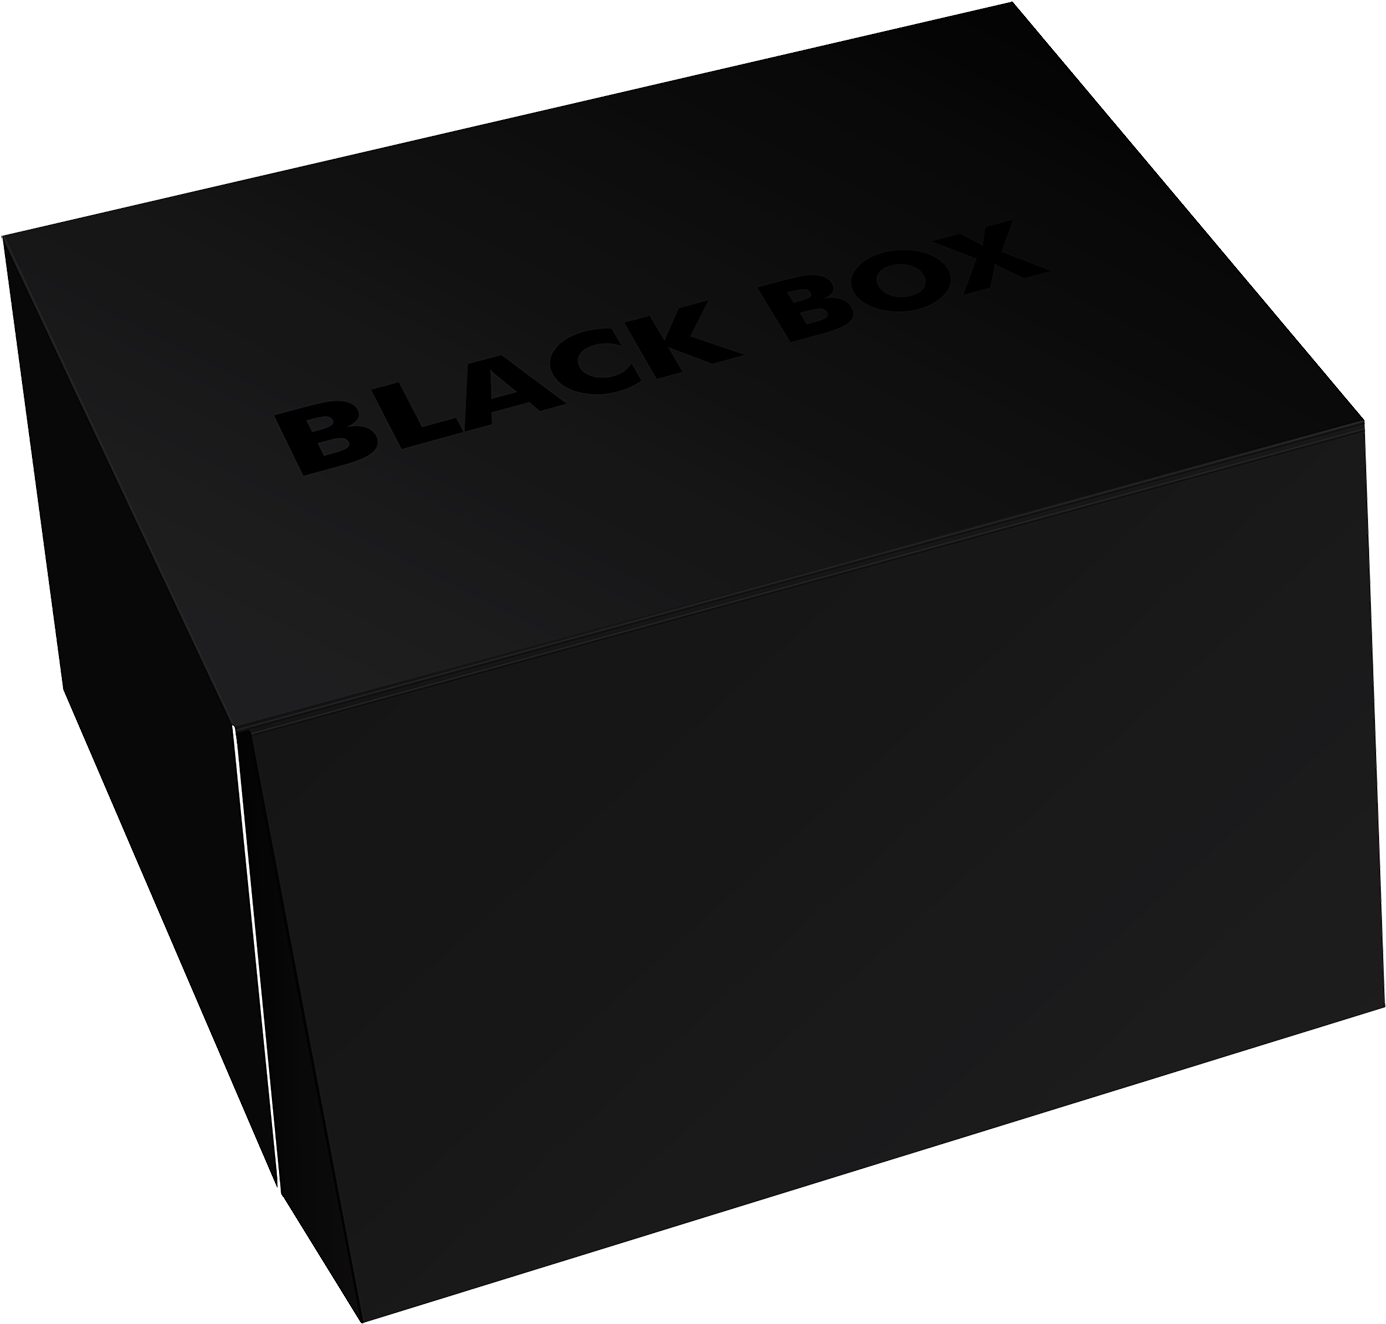 A Black Box With Text On It